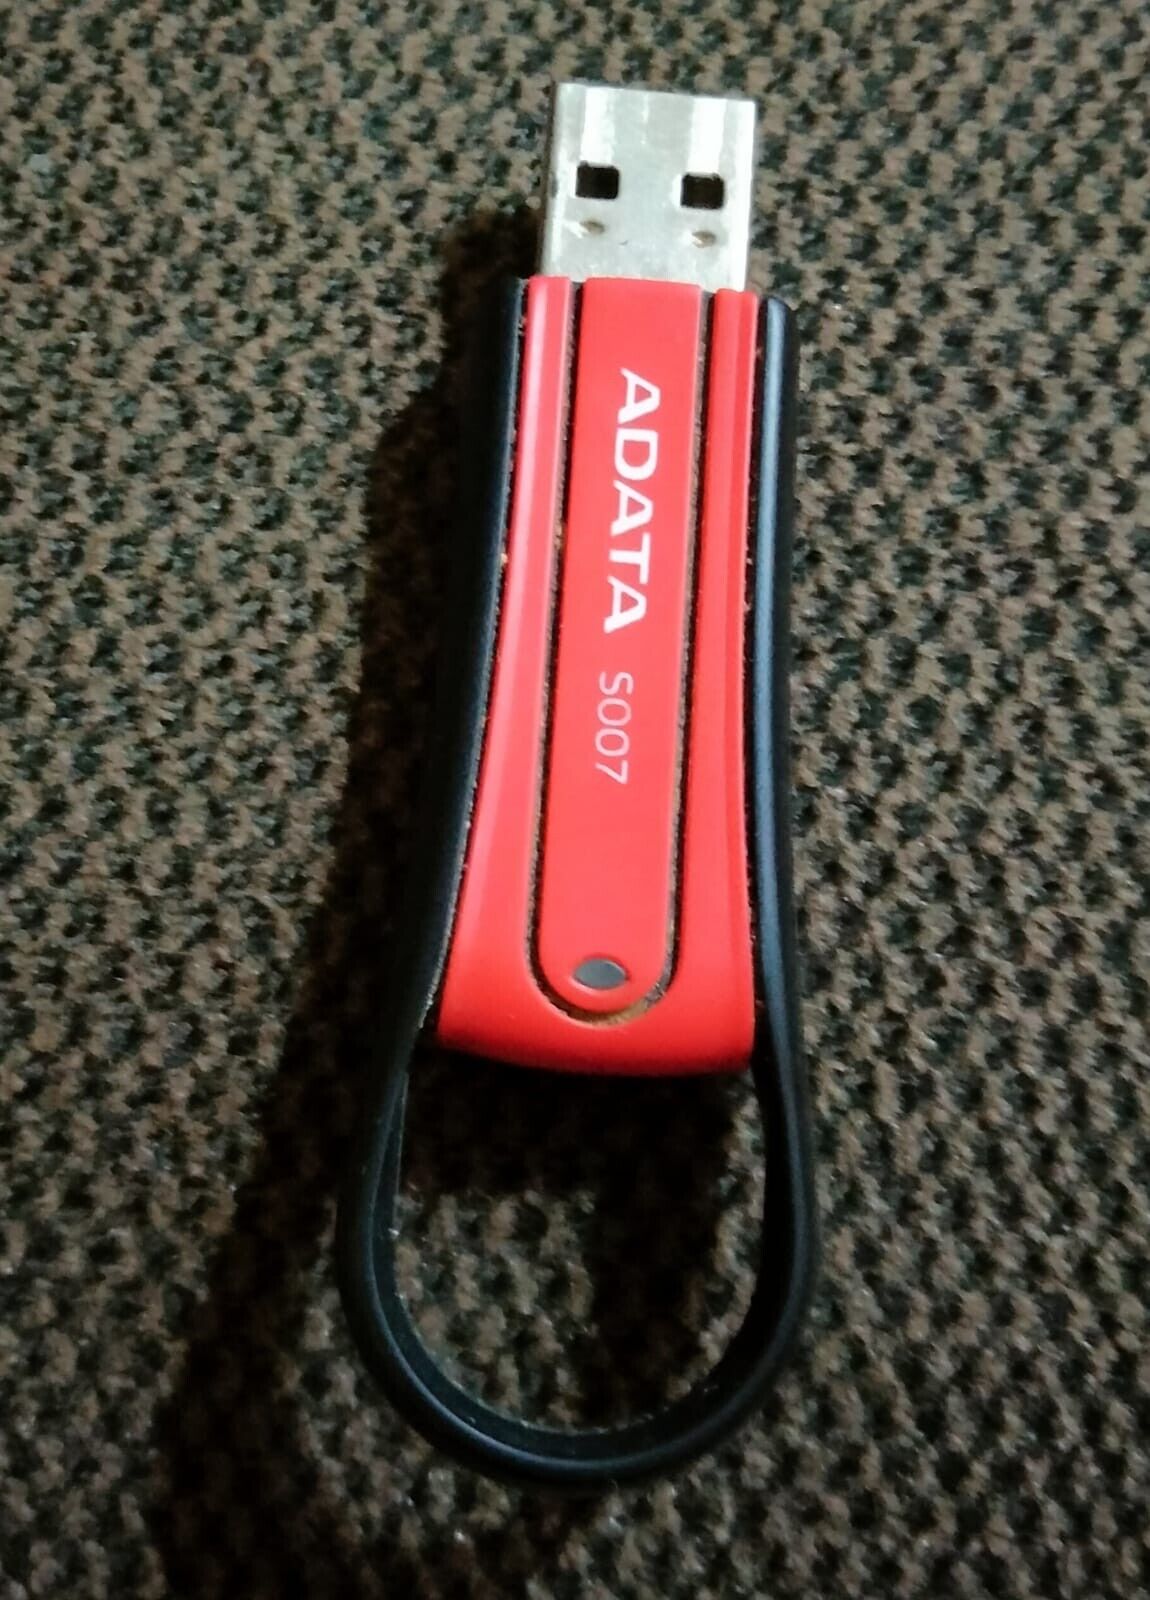 Vintage ADATA S007 USB Flash Drive 4 GB Without Cover, Red and Black Color